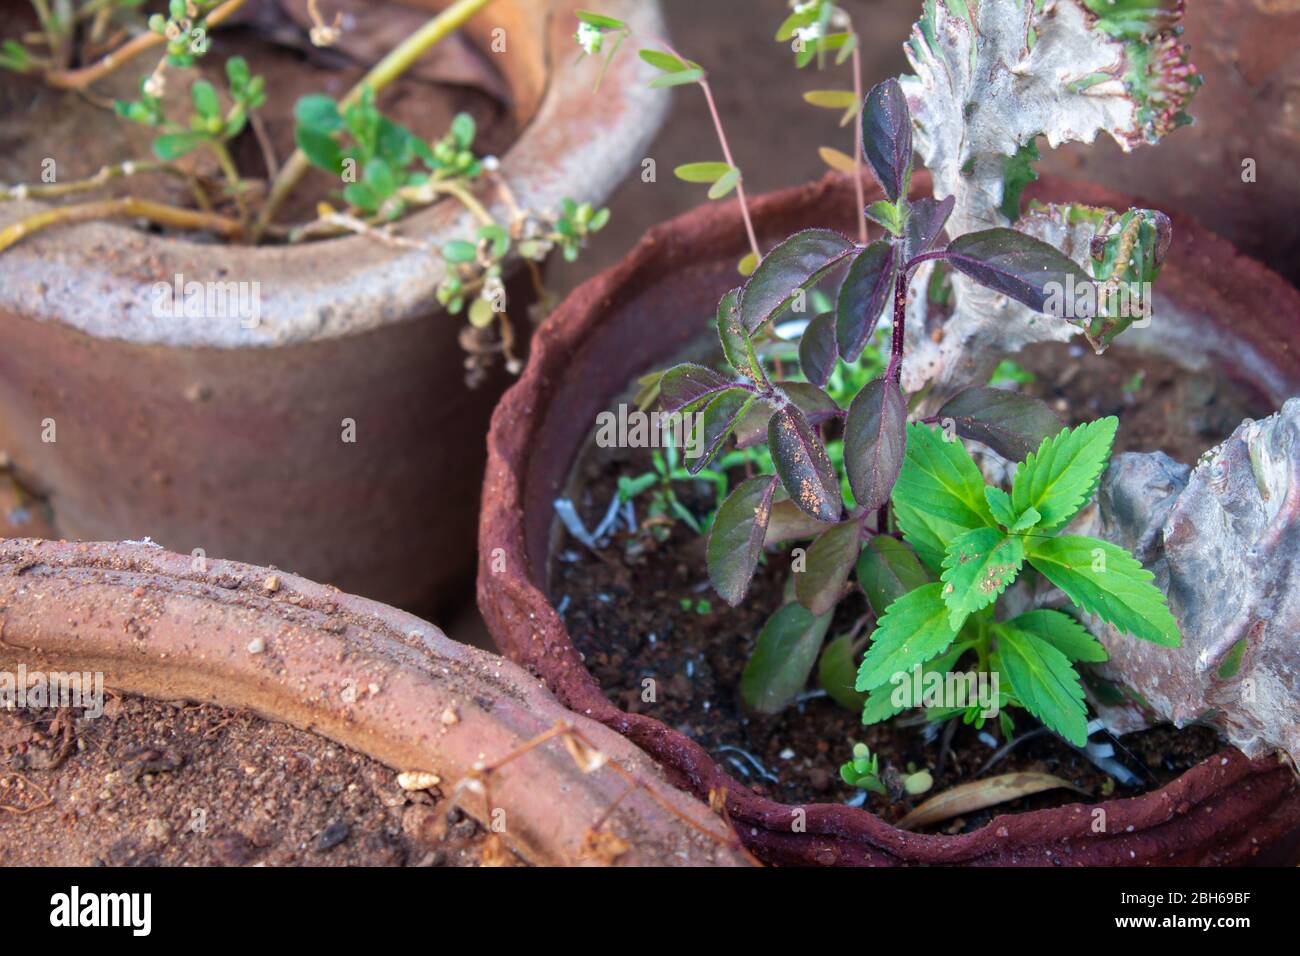 View of the pots with herbs and vegetable plants in a garden Stock Photo